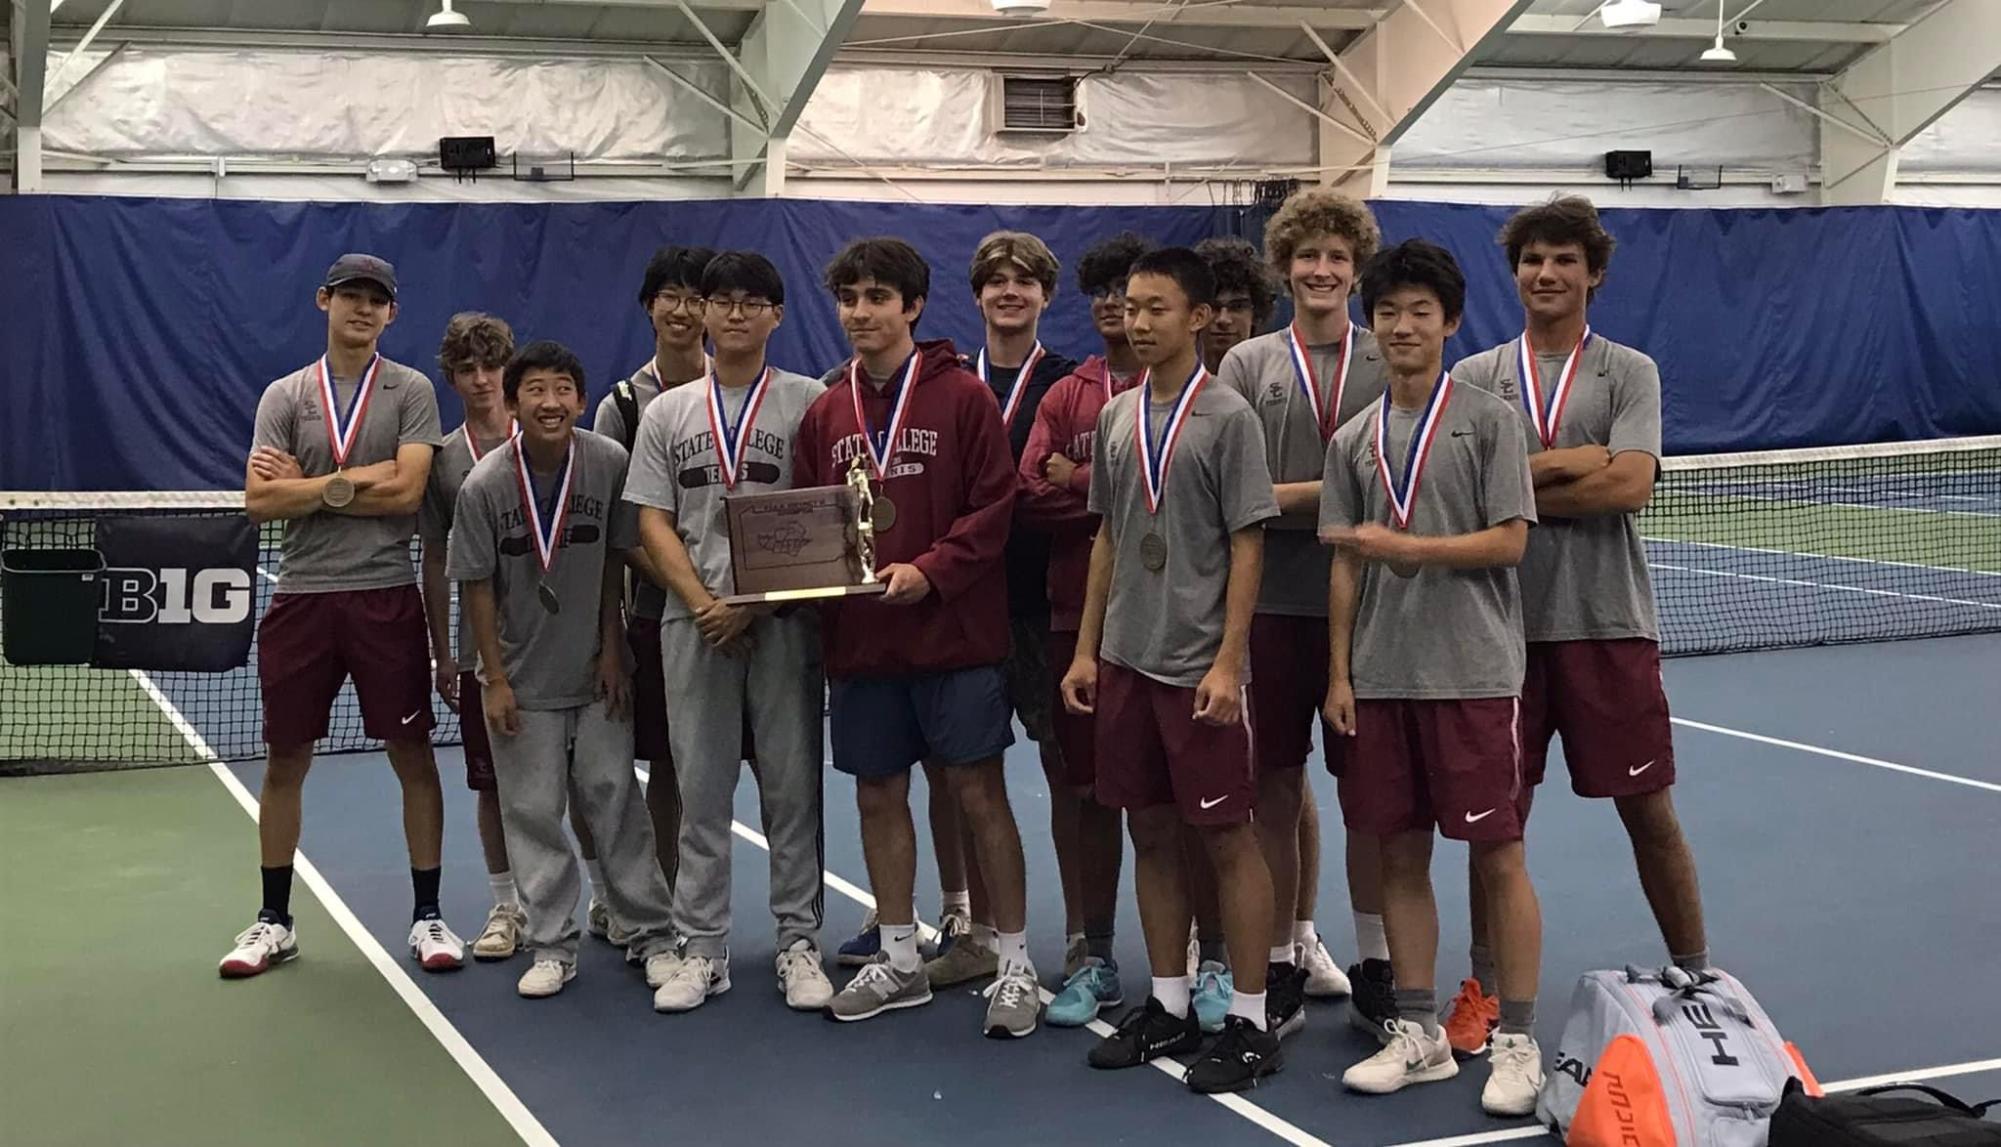 State High Boys Tennis players after the championship win